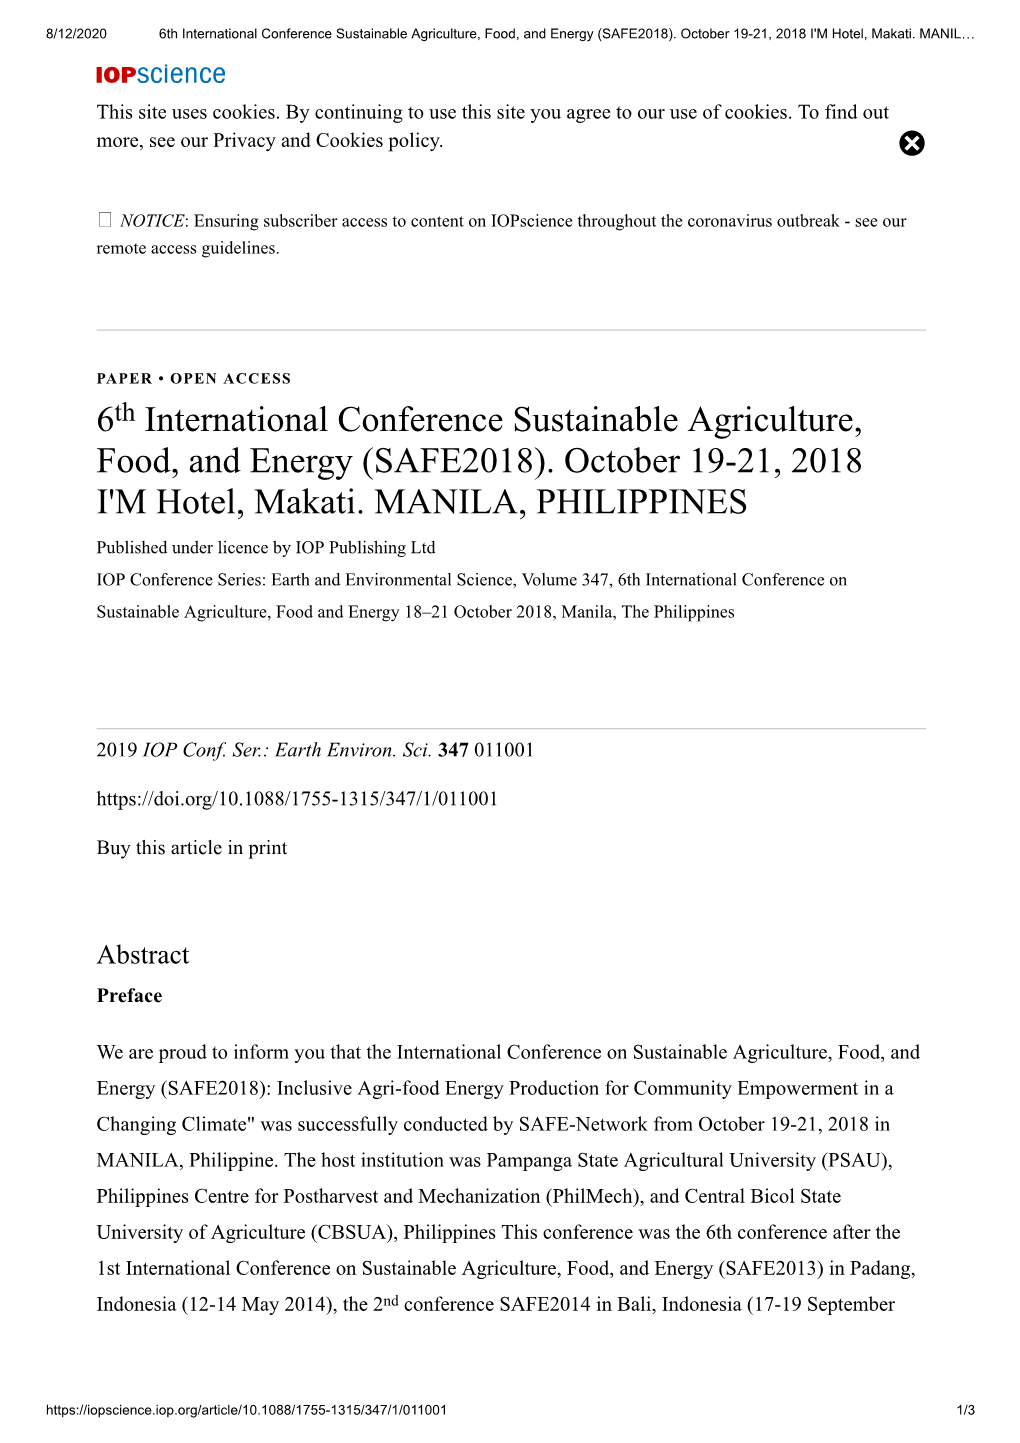 6 International Conference Sustainable Agriculture, Food, and Energy (SAFE2018)